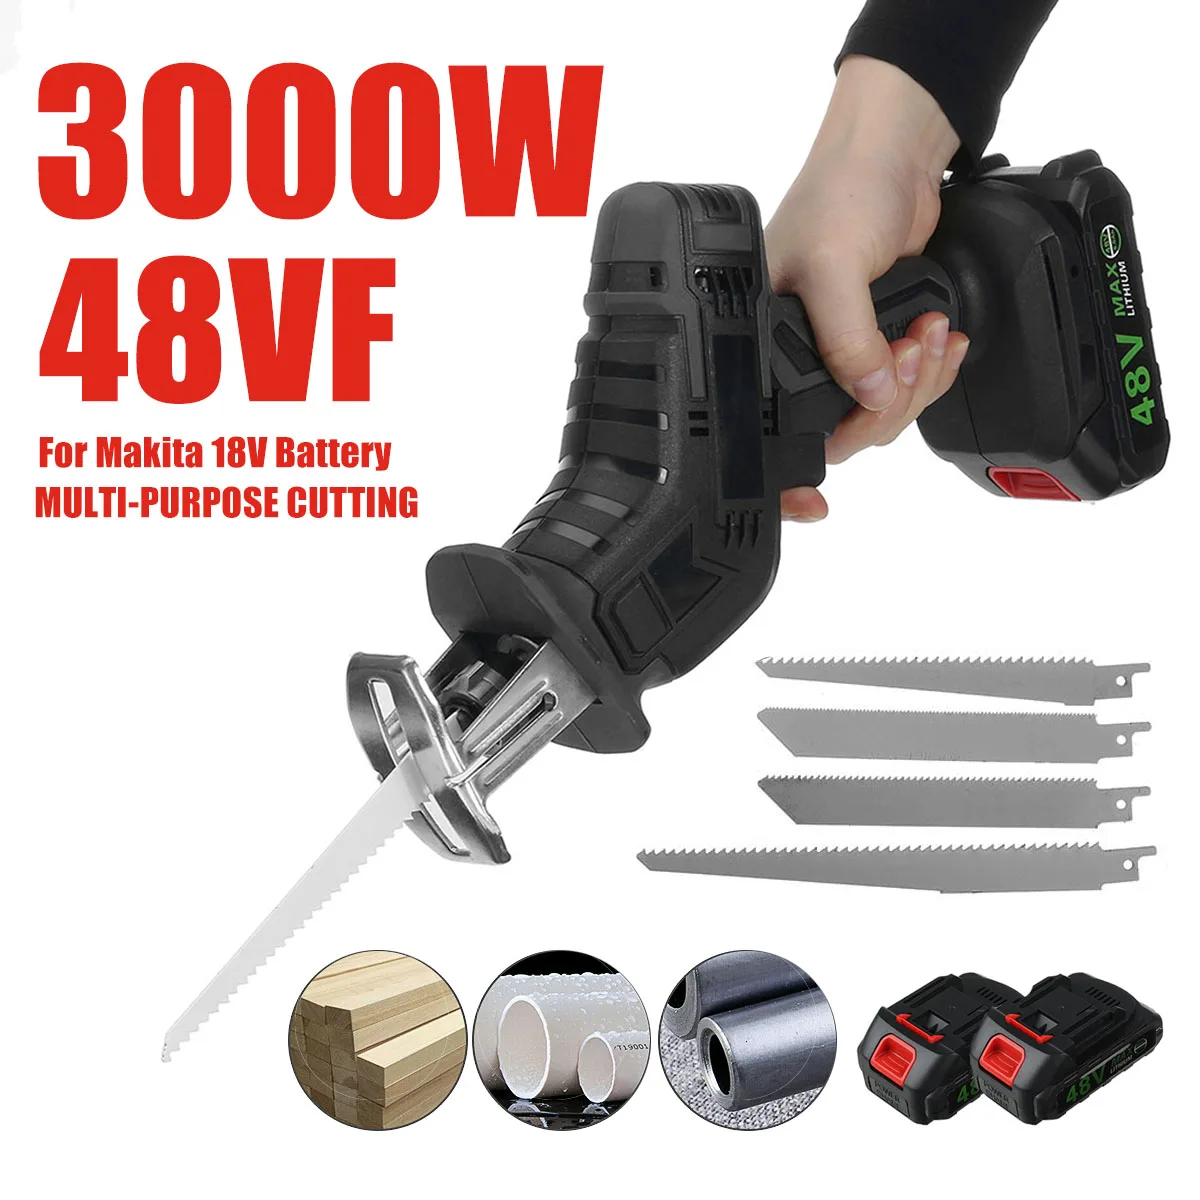 

48V Cordless Reciprocating Saw + 4 Saw Blades Metal Cutting Wood Tool Portable Woodworking Cutters Saw with 1/2 Batterys Charge